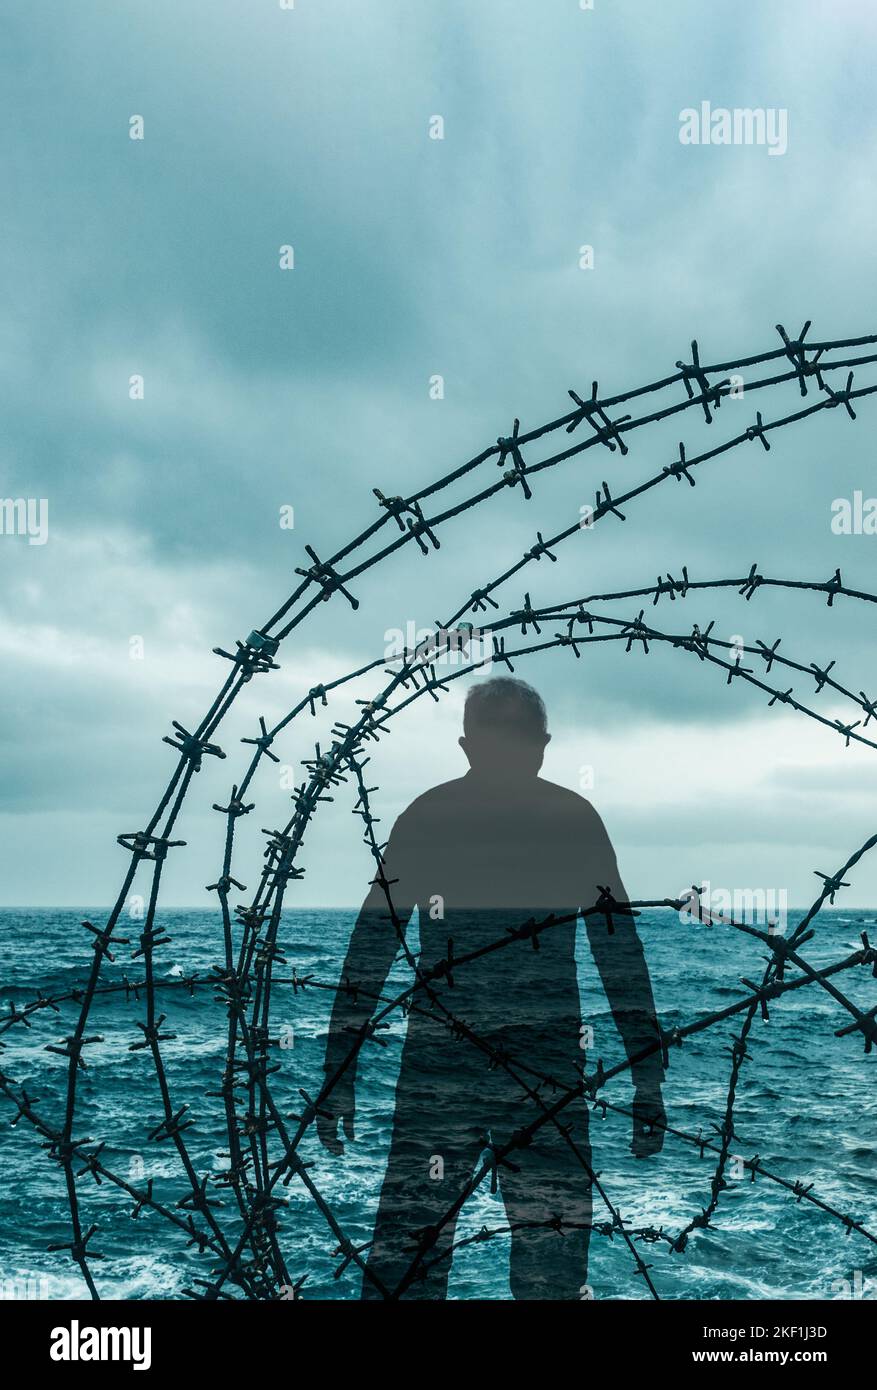 Man looking through barbed wire fence on beach. Border control crossing, migrants, asylum seeker, migrant, people smuggling... concept Stock Photo